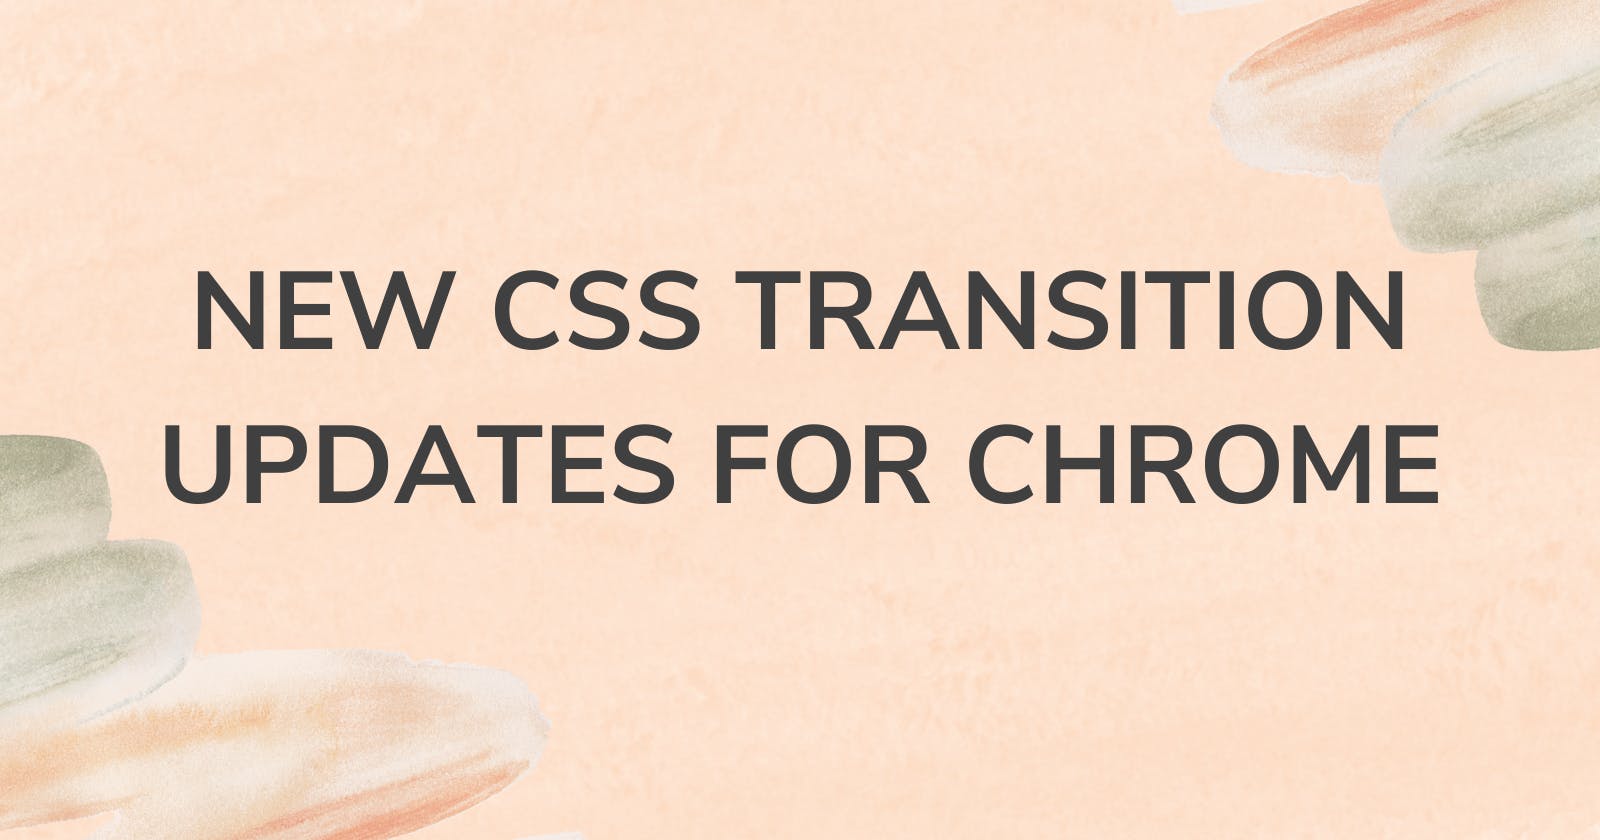 New CSS Transition Updates for Chrome!